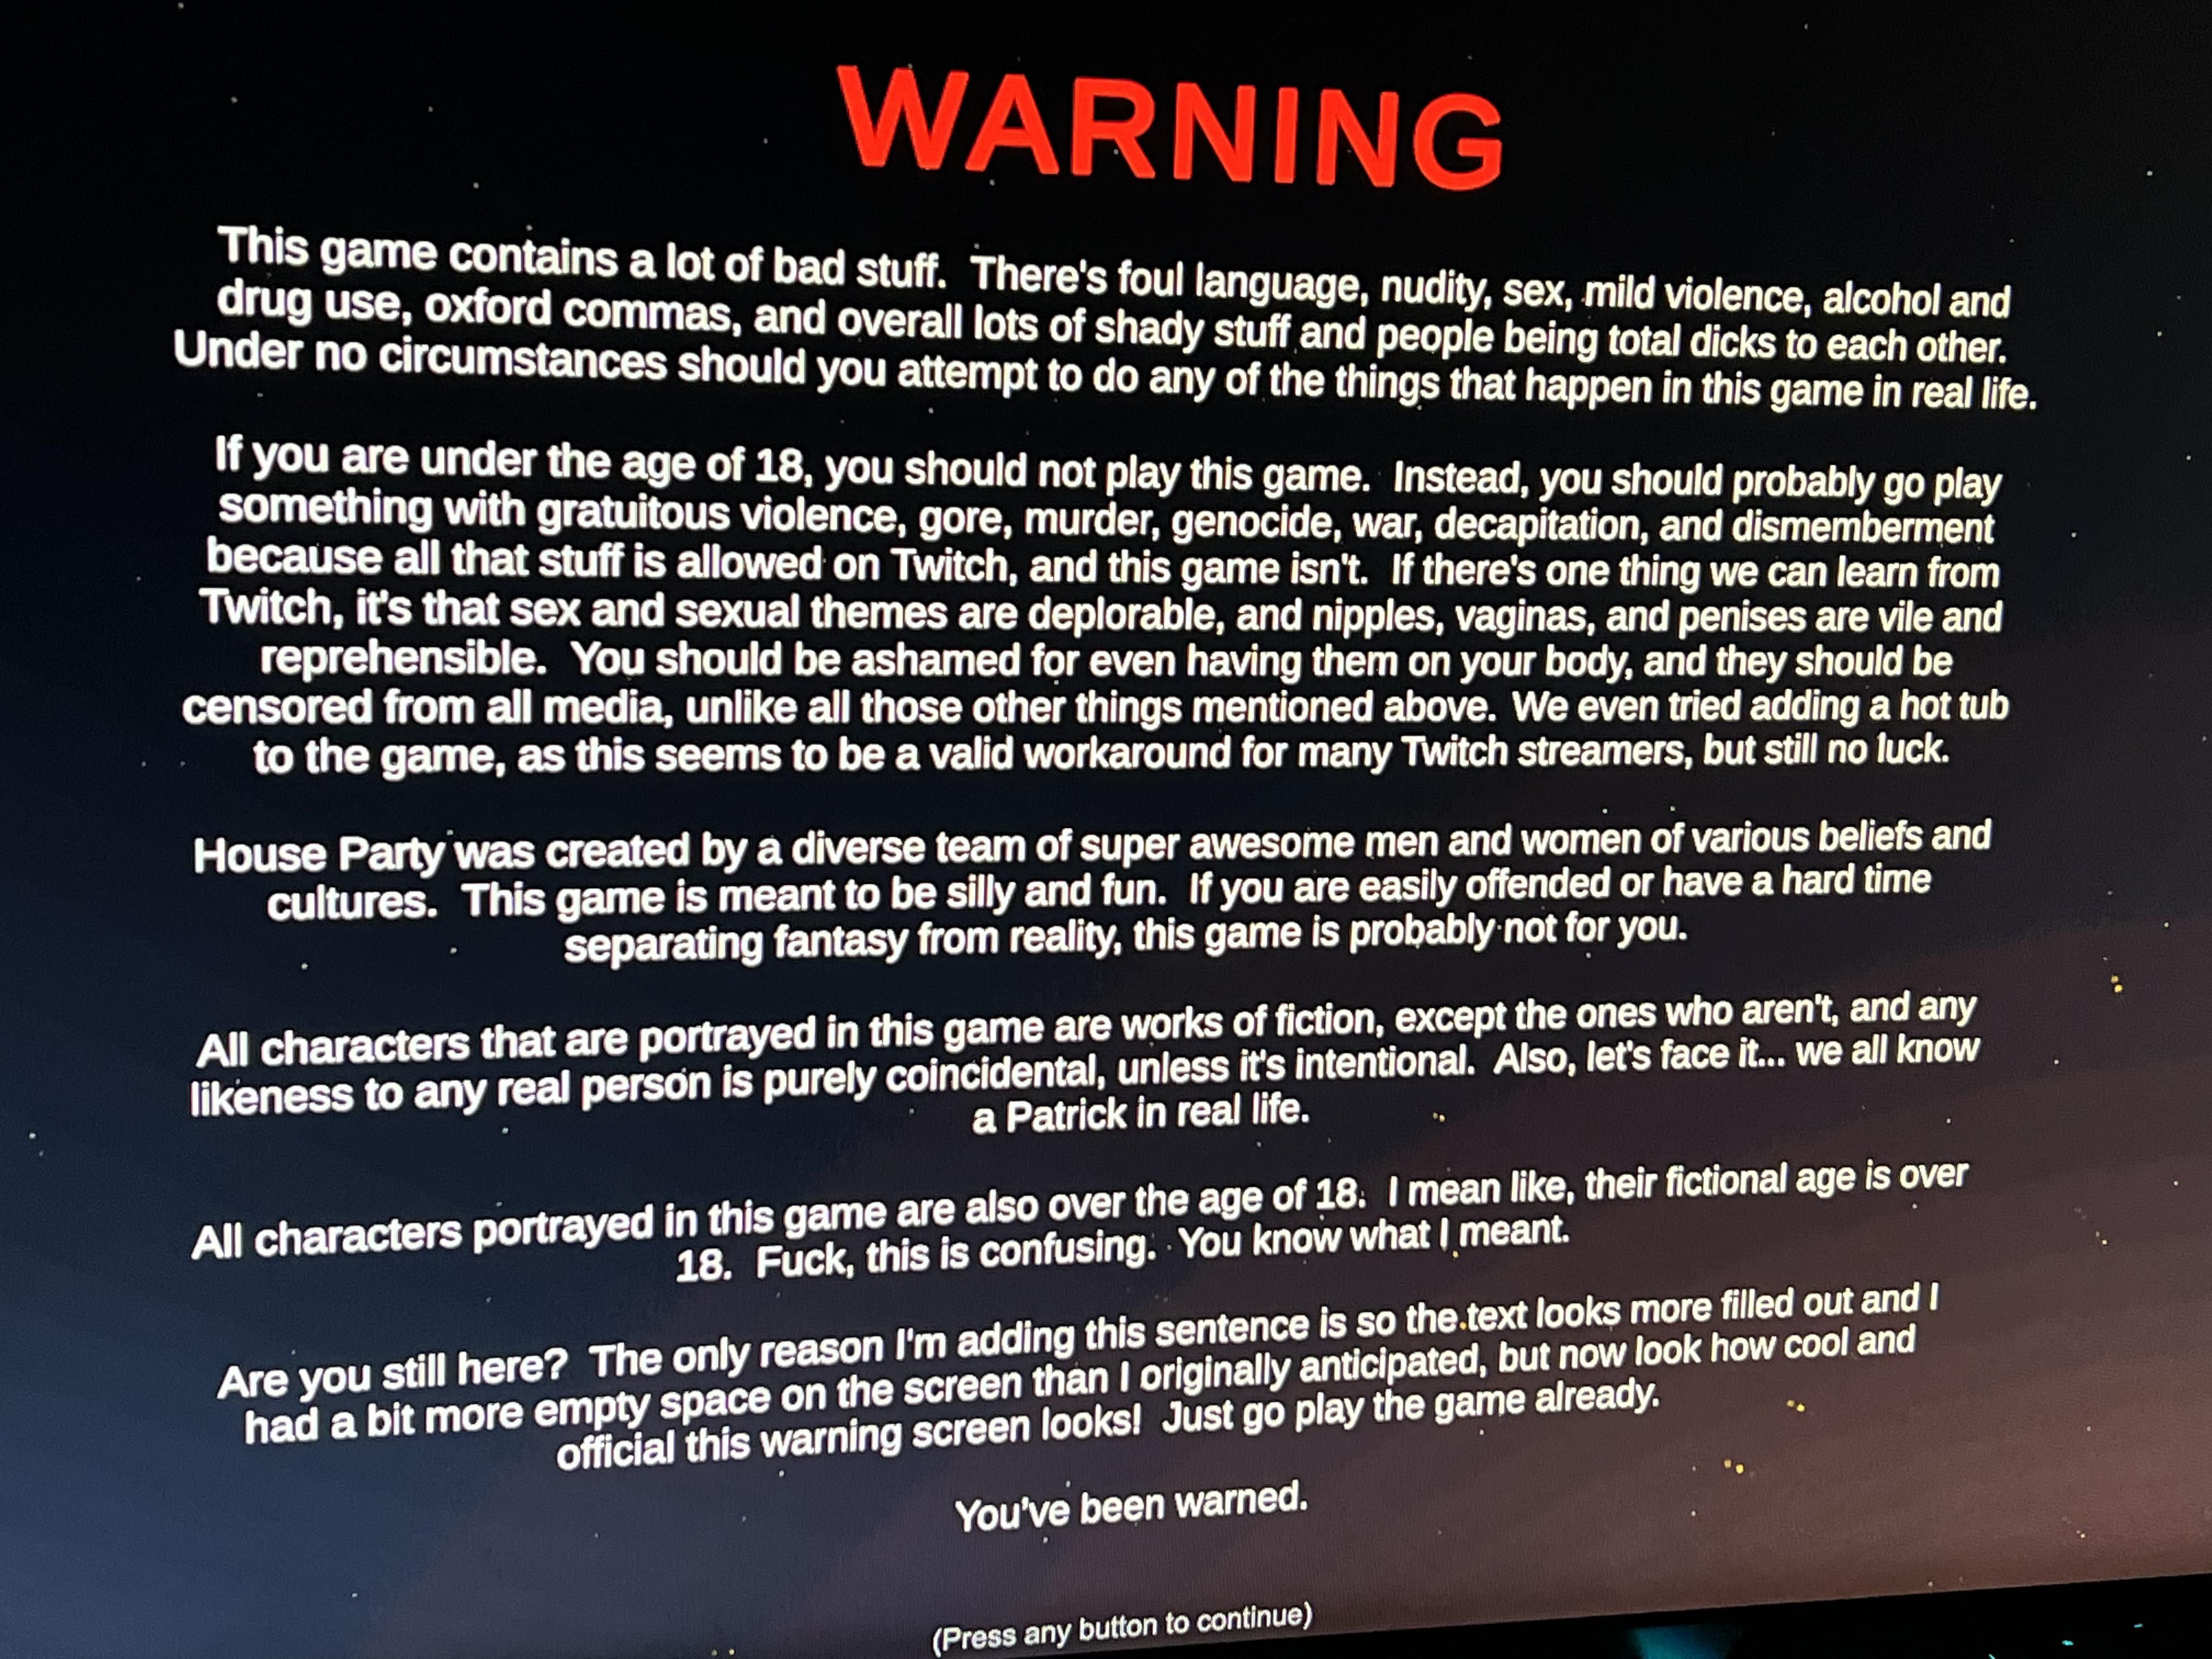 The best pre-game warning ever